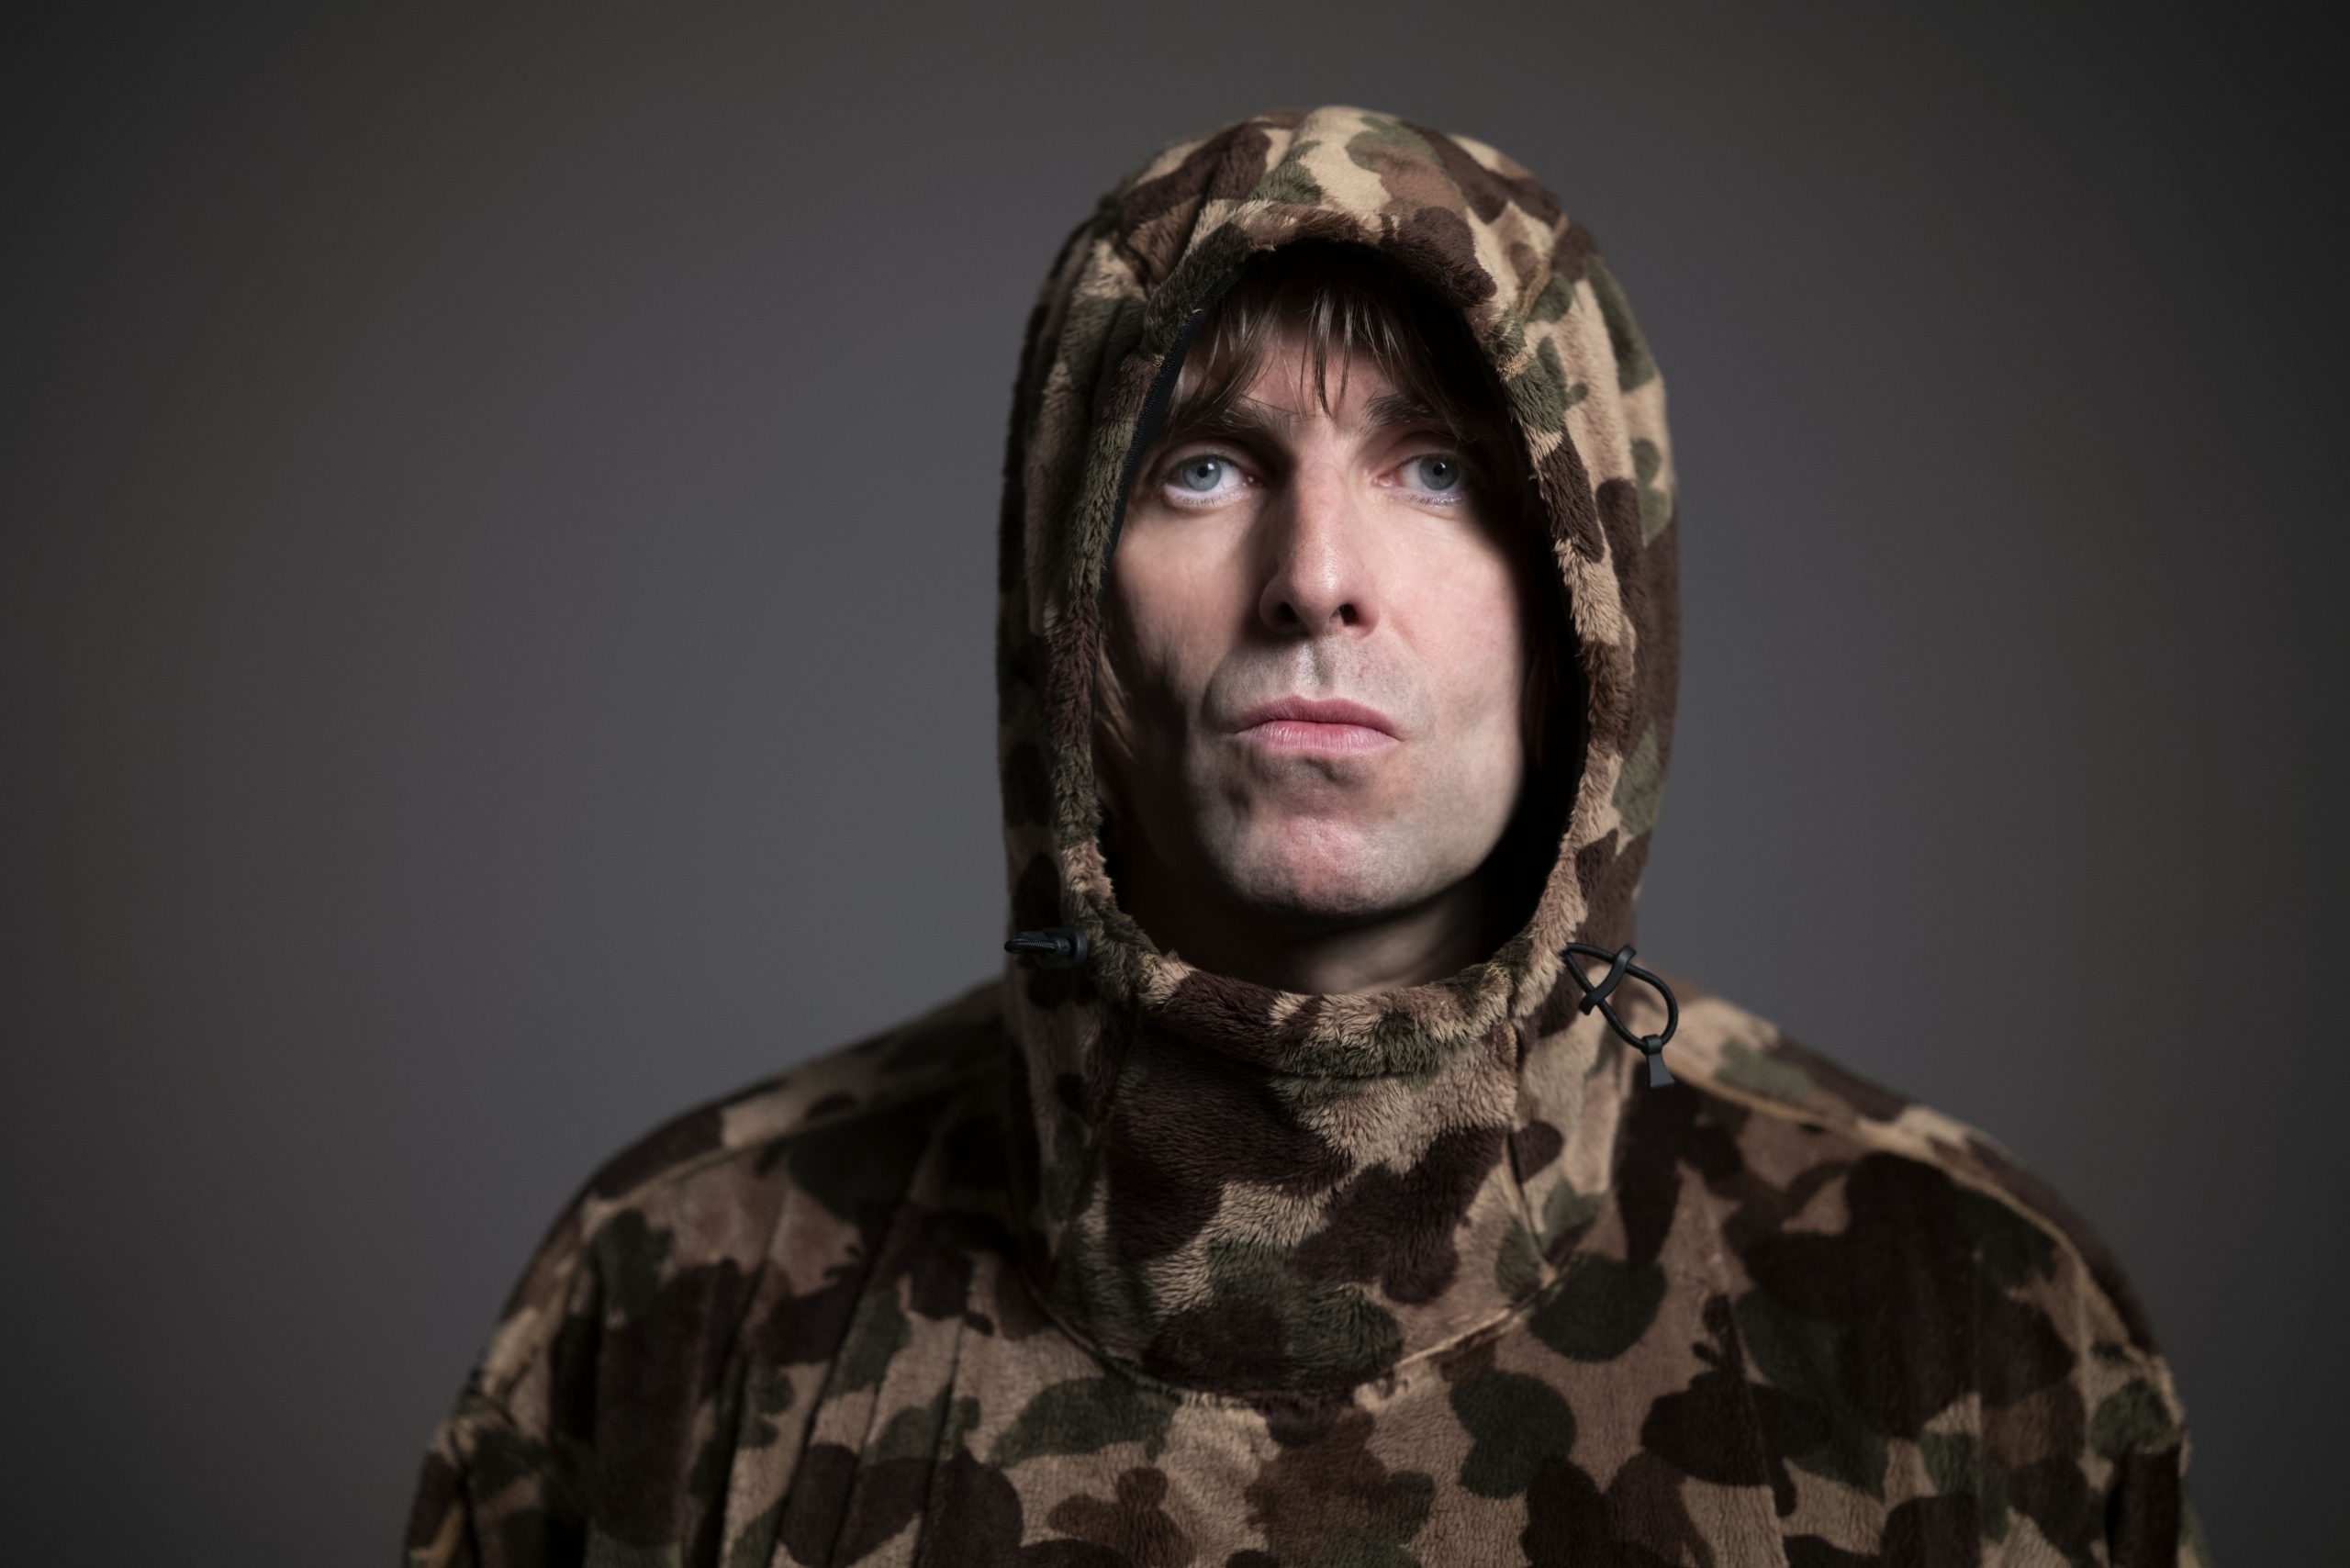 Liam Gallagher on Oasis, Noel and rock 'n' roll survival: 'I kept my ego in check'